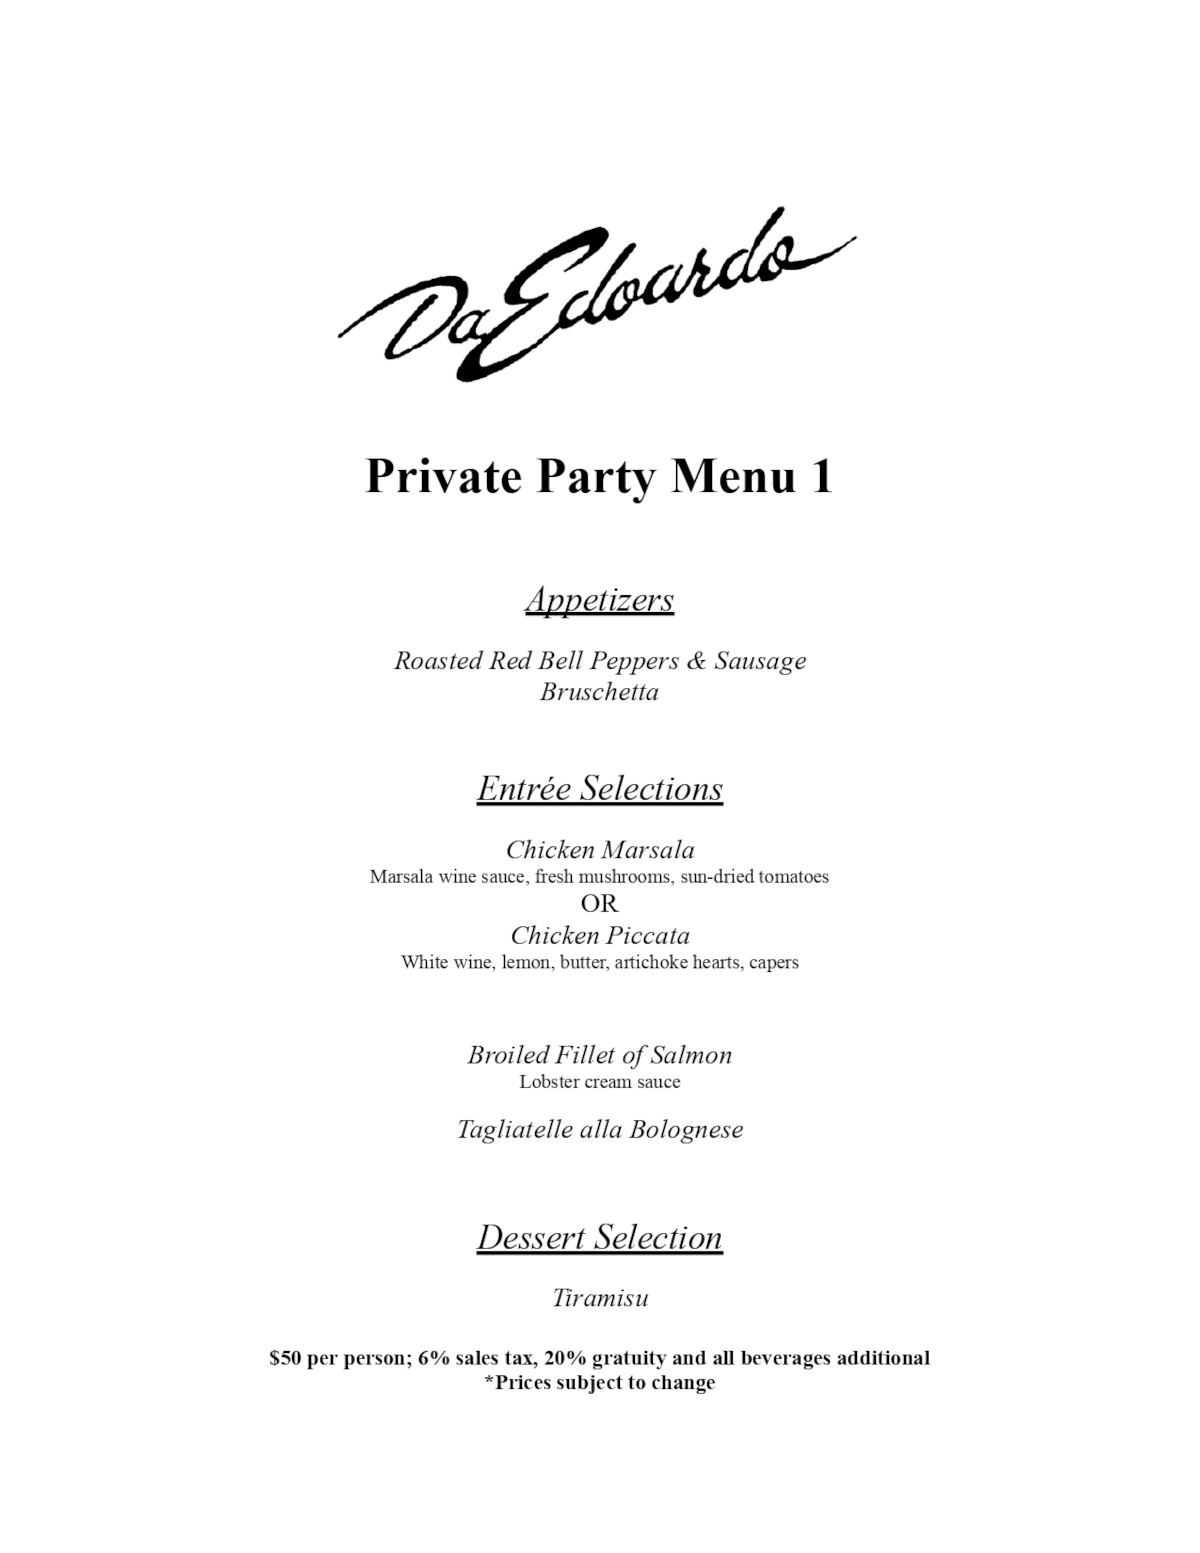 Grosse Pointe Private Party menu page 1